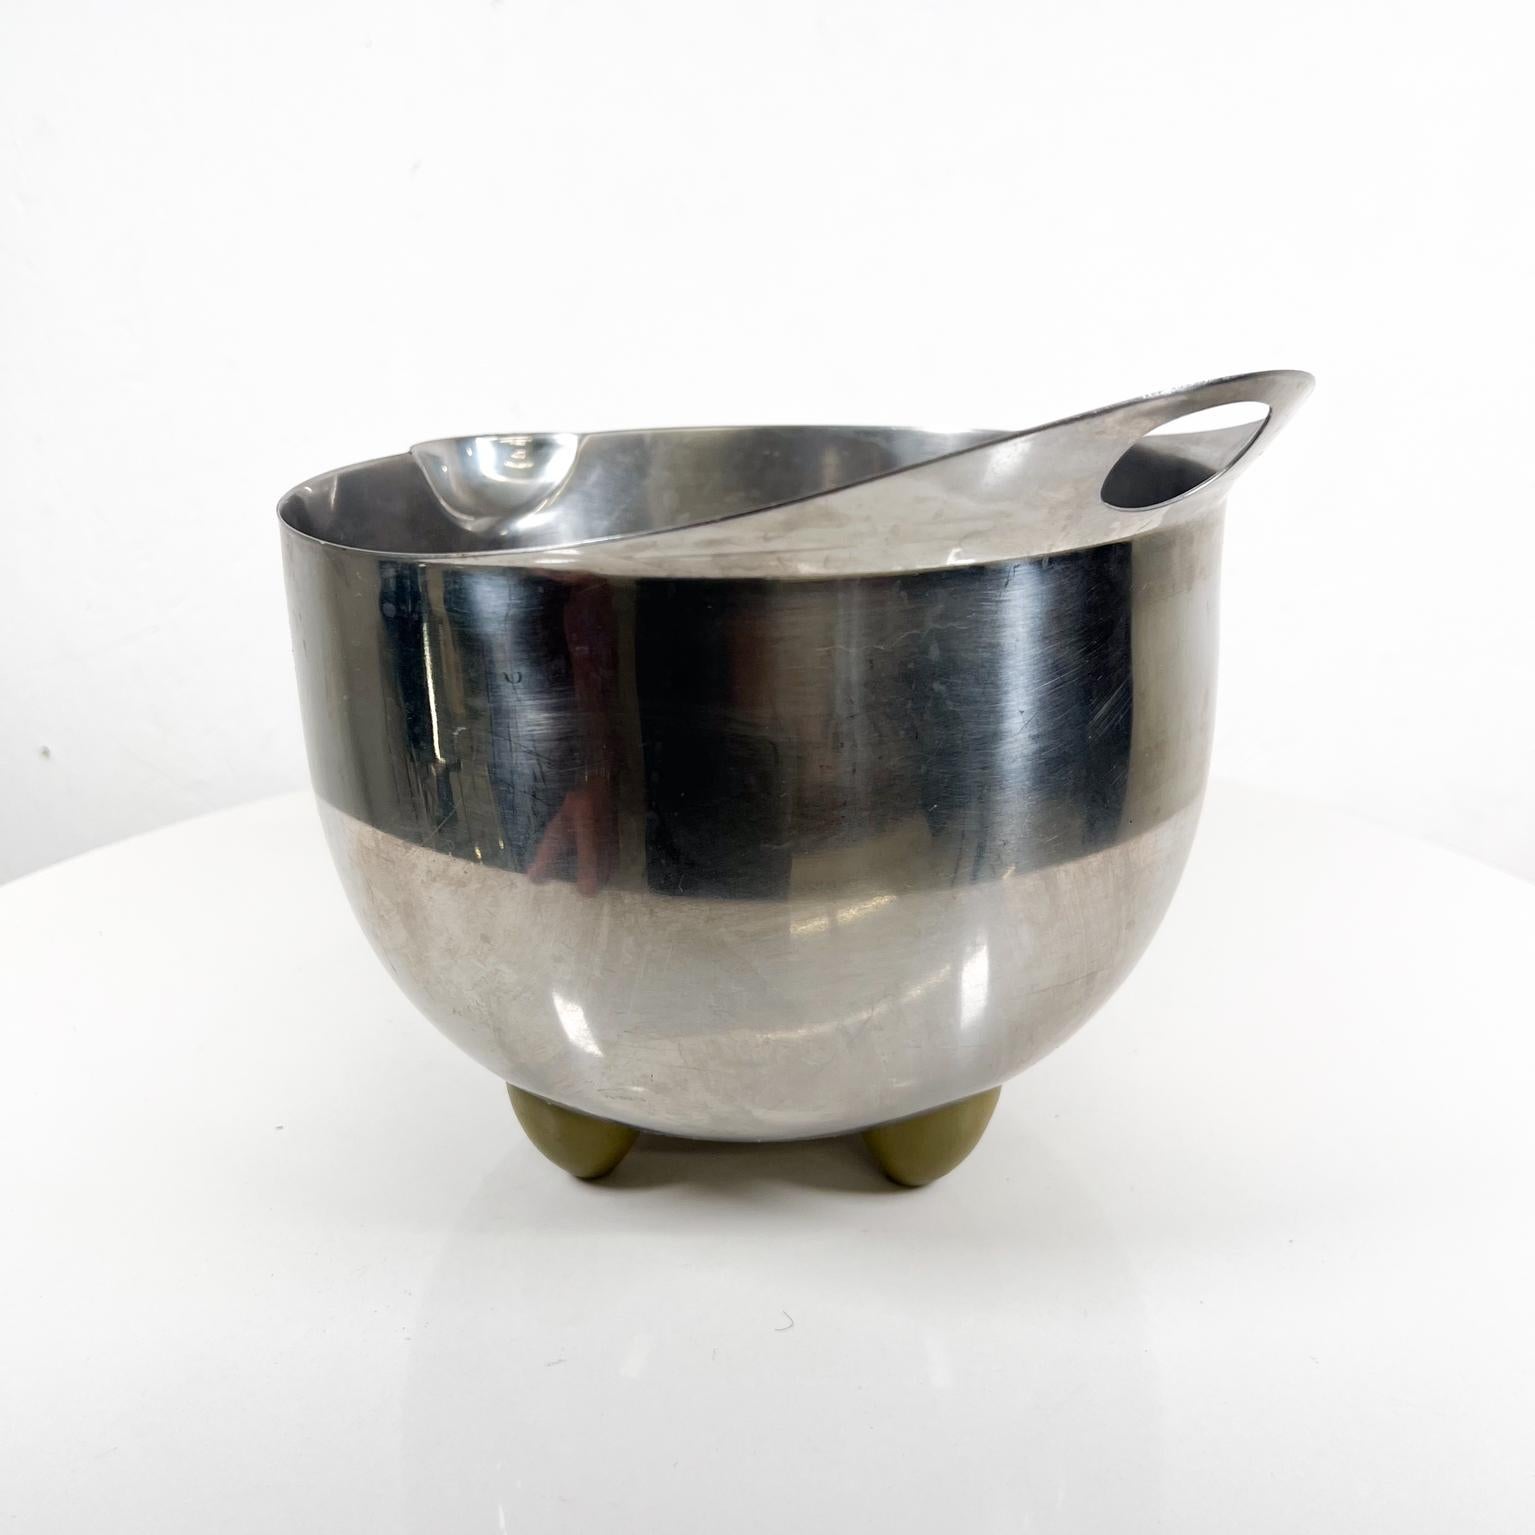 Modern 1985 Michael Graves Design Stainless Steel Footed Mixing Bowl For Sale